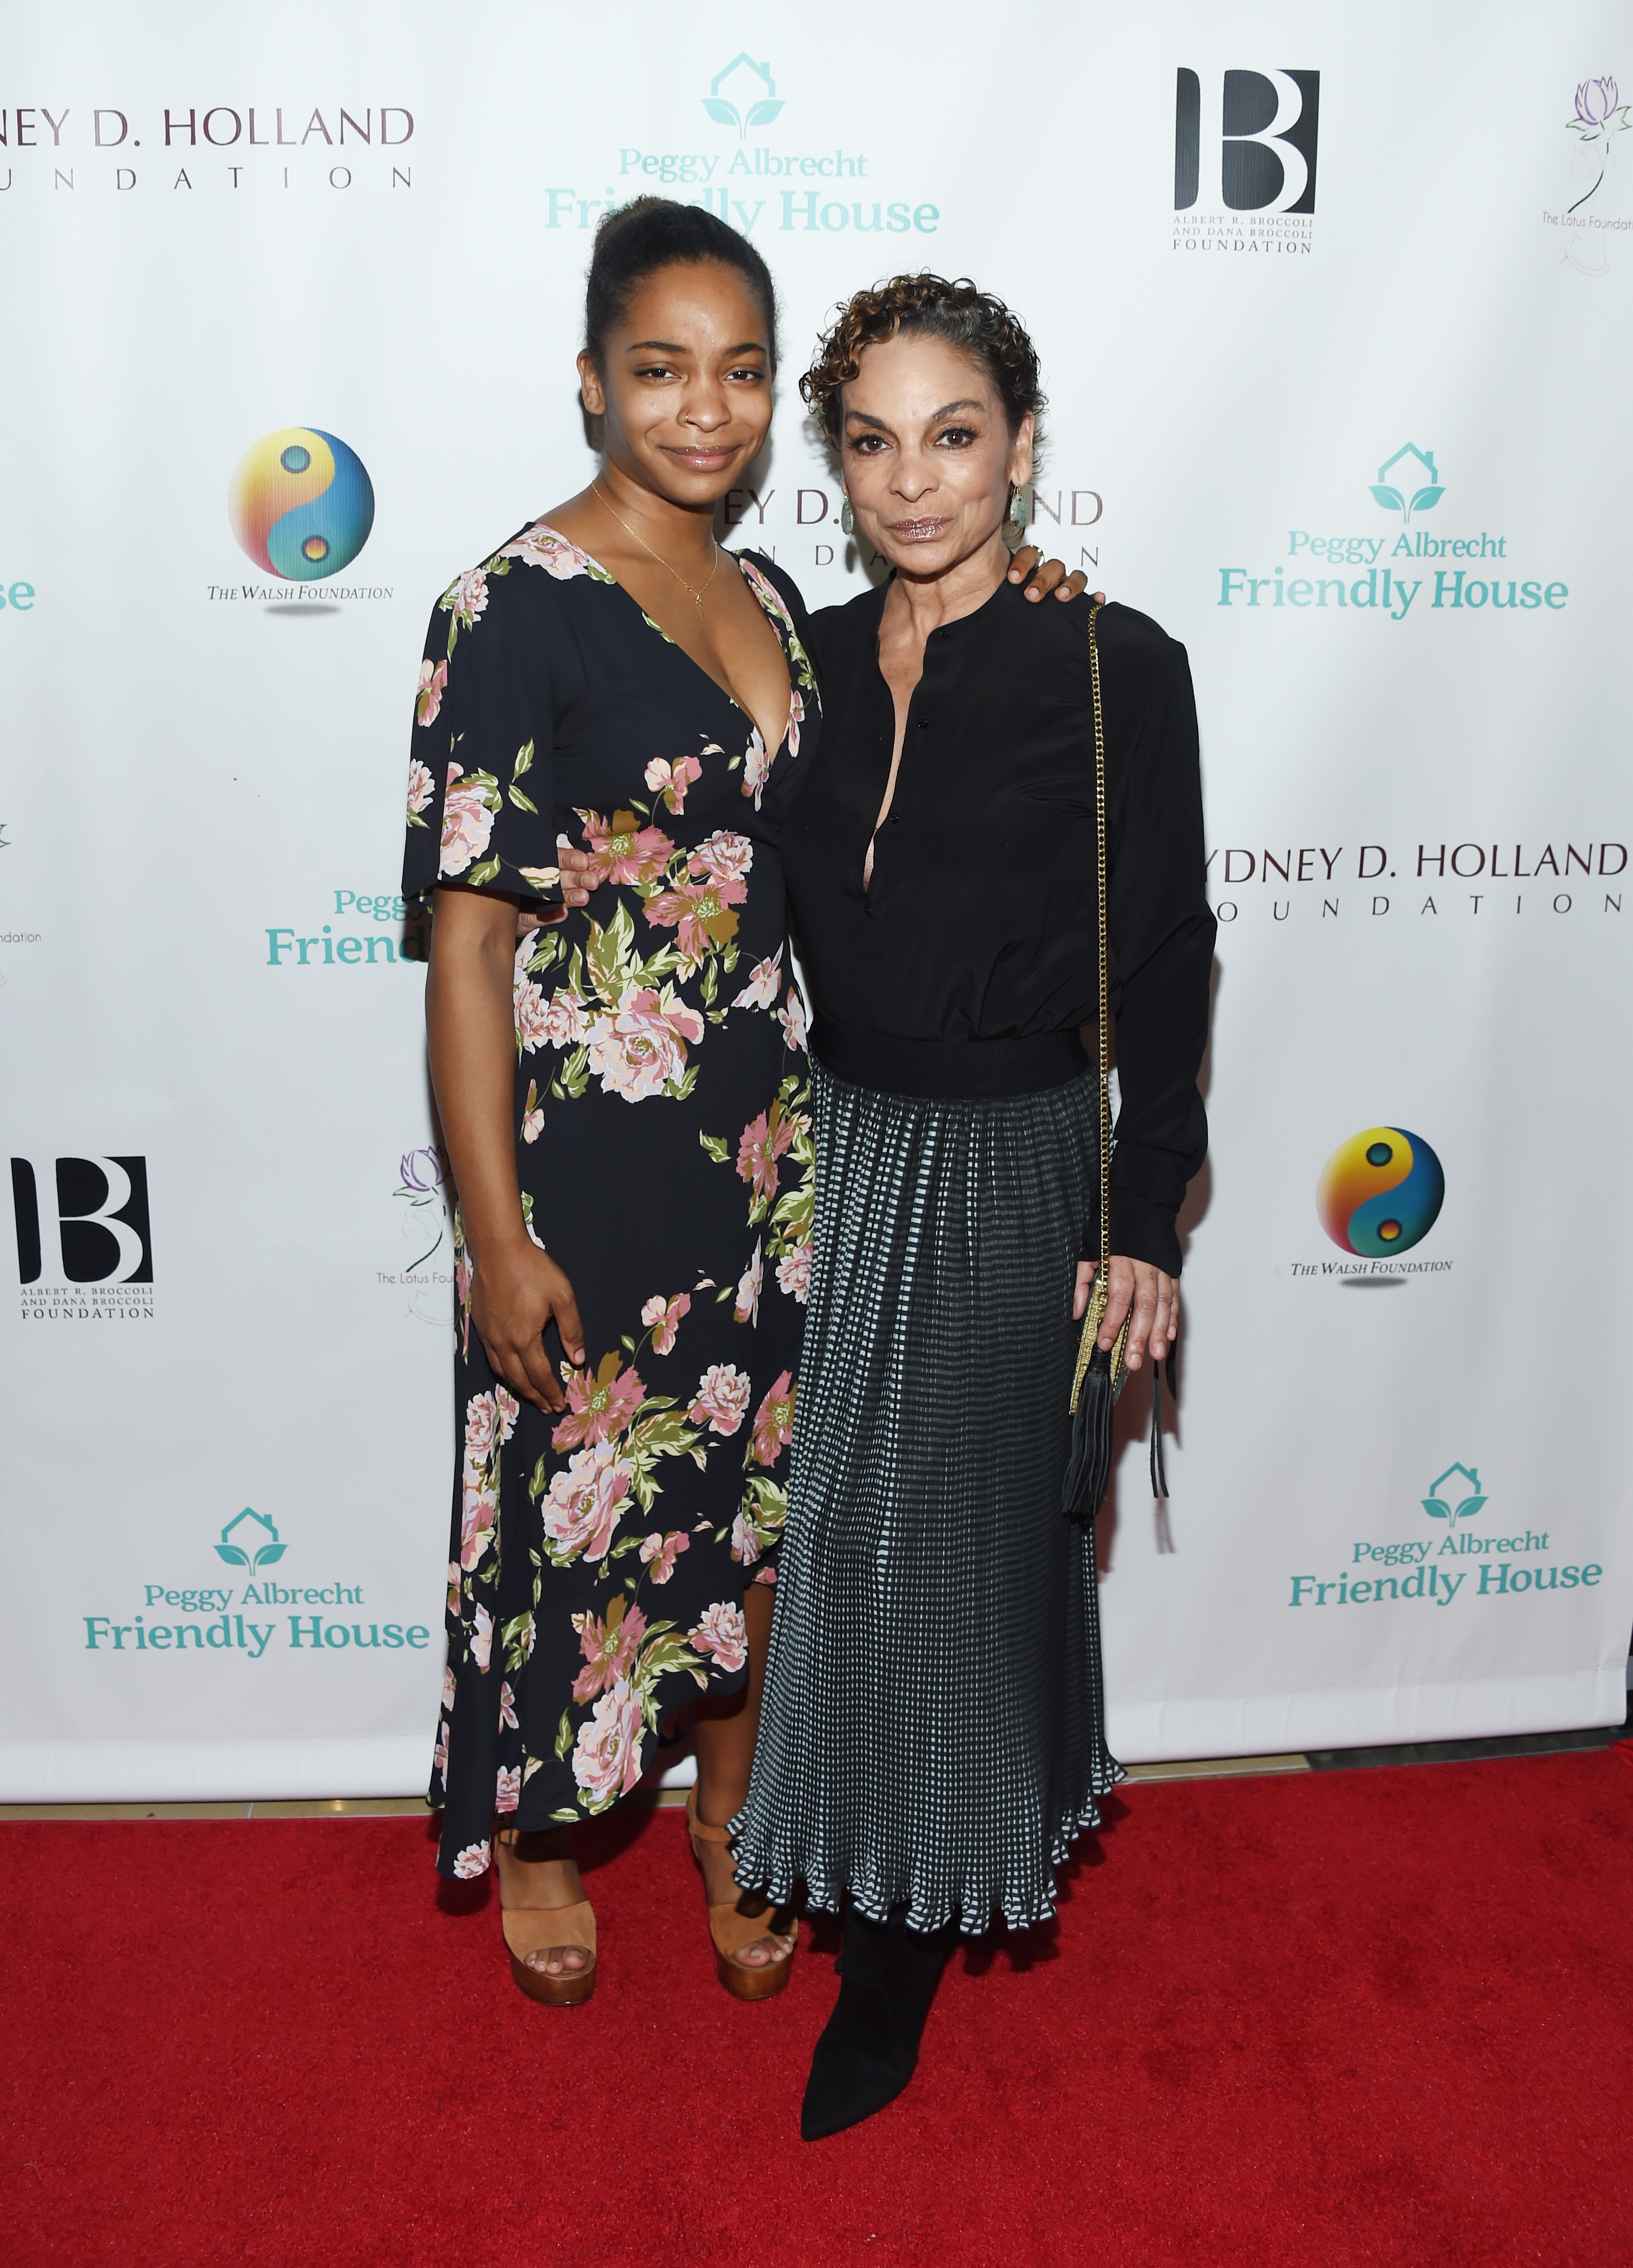 Jasmine Guy and her daughter Imani Duckett arrive at the Peggy Albrecht Friendly House's 29th Annual Awards Luncheon at The Beverly Hilton Hotel on October 27, 2018 in Beverly Hills, California. | Source: Getty Images